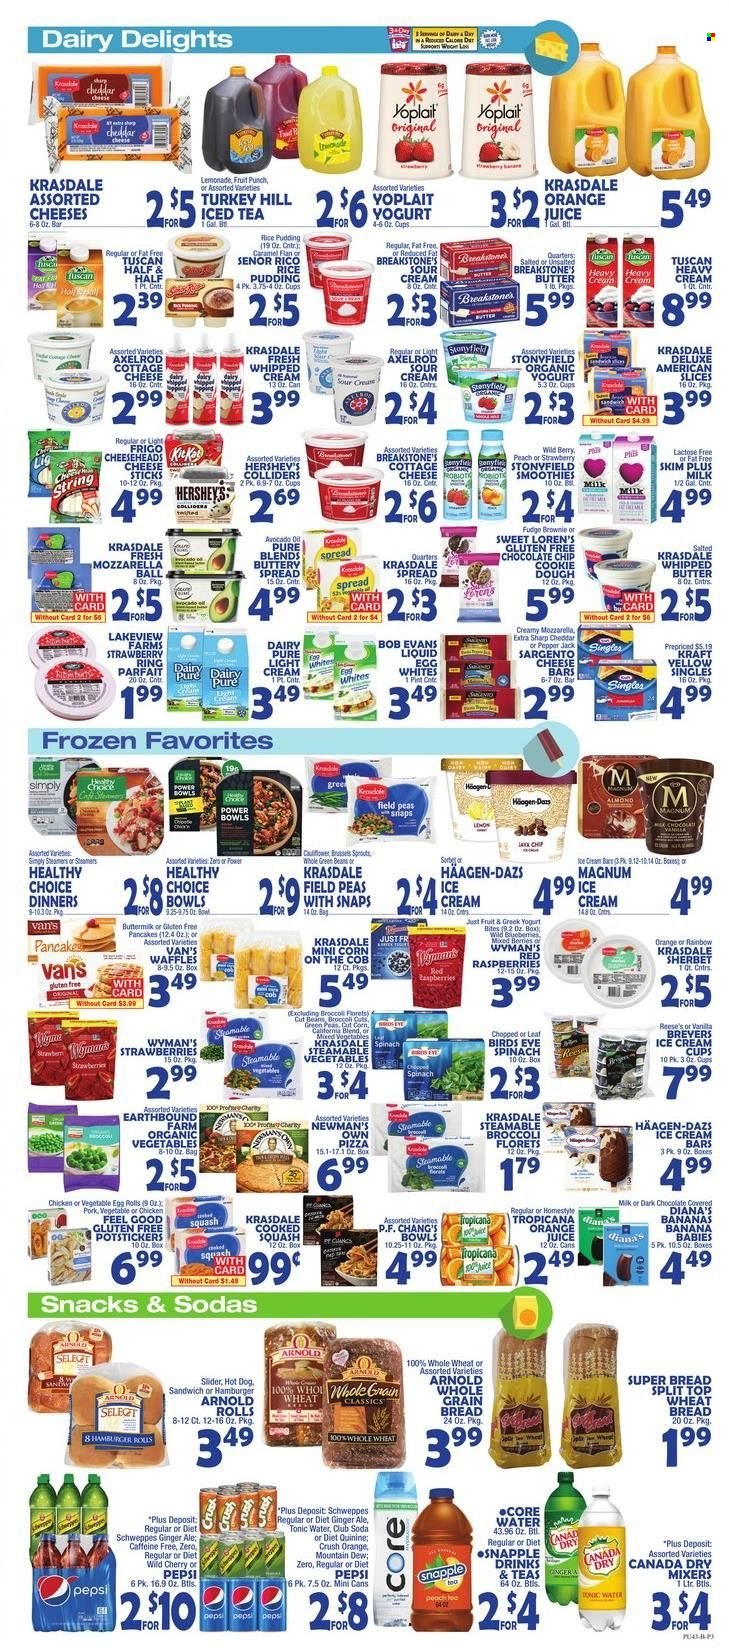 thumbnail - Bravo Supermarkets Flyer - 05/13/2022 - 05/19/2022 - Sales products - wheat bread, brownies, waffles, beans, broccoli, corn, green beans, blueberries, strawberries, cherries, hot dog, pizza, sandwich, hamburger, egg rolls, pancakes, Bird's Eye, Healthy Choice, Kraft®, Bob Evans, cottage cheese, sandwich slices, cheddar, Pepper Jack cheese, Sargento, greek yoghurt, Yoplait, rice pudding, milk, butter, buttery spread, sour cream, whipped cream, ice cream, sherbet, Reese's, Hershey's, Häagen-Dazs, cookie dough, fudge, snack, avocado oil, oil, Canada Dry, ginger ale, lemonade, Mountain Dew, Schweppes, Pepsi, orange juice, juice, ice tea, tonic, Diet Pepsi, Snapple, fruit punch, smoothie, Club Soda, Fairy, Half and half. Page 4.